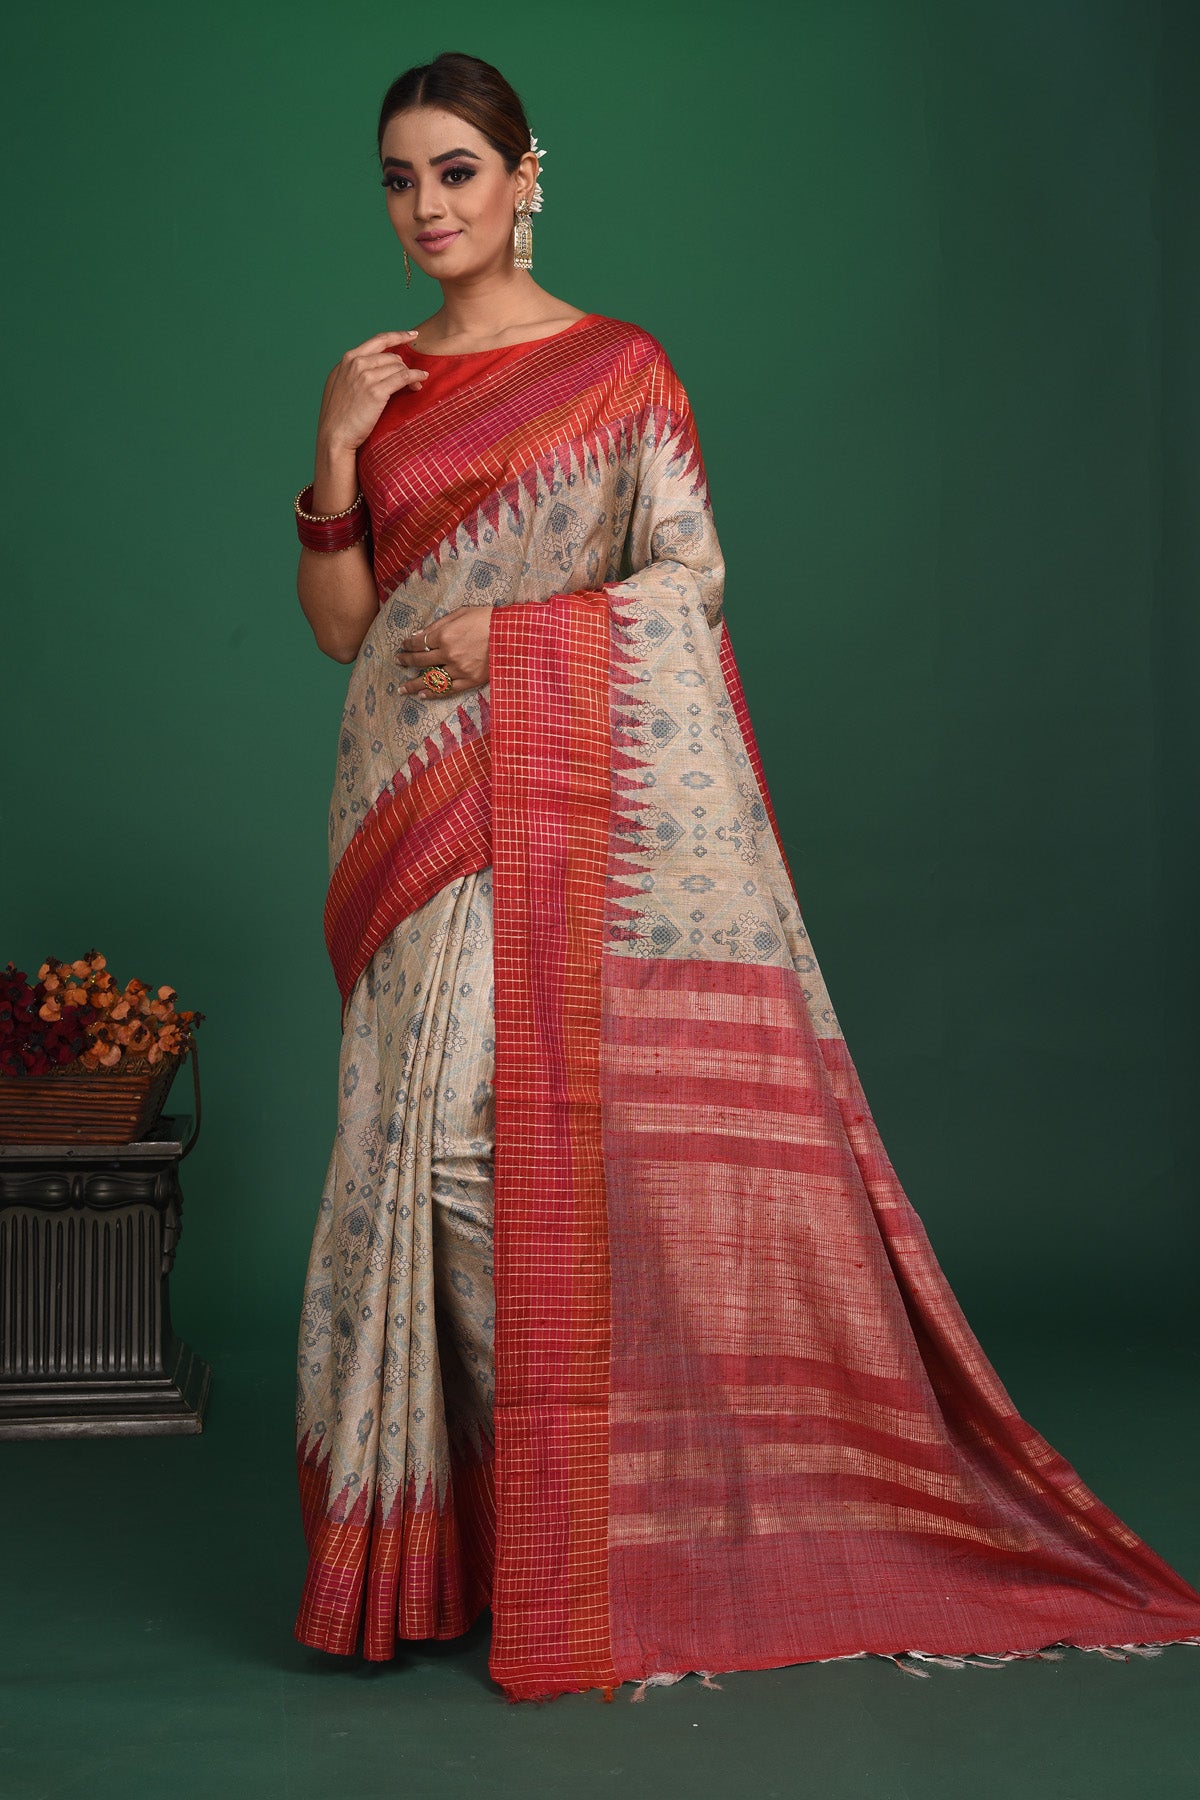 Shop this exquisite beige tussar saree with red vidharbha and zari border online in USA which is handcrafted from fine silk tussar fabric, this tie and dye saree brings out the nature of flow. This tussar saree with elegant red Vidharbha border is making everyone swoon over it. Make it yours and flaunt a handwoven marvel with minimal jewellery for a casual day outfit. Add this pure tussar saree to your collection from Pure Elegance Indian fashion store in USA.-Side view with open pallu.